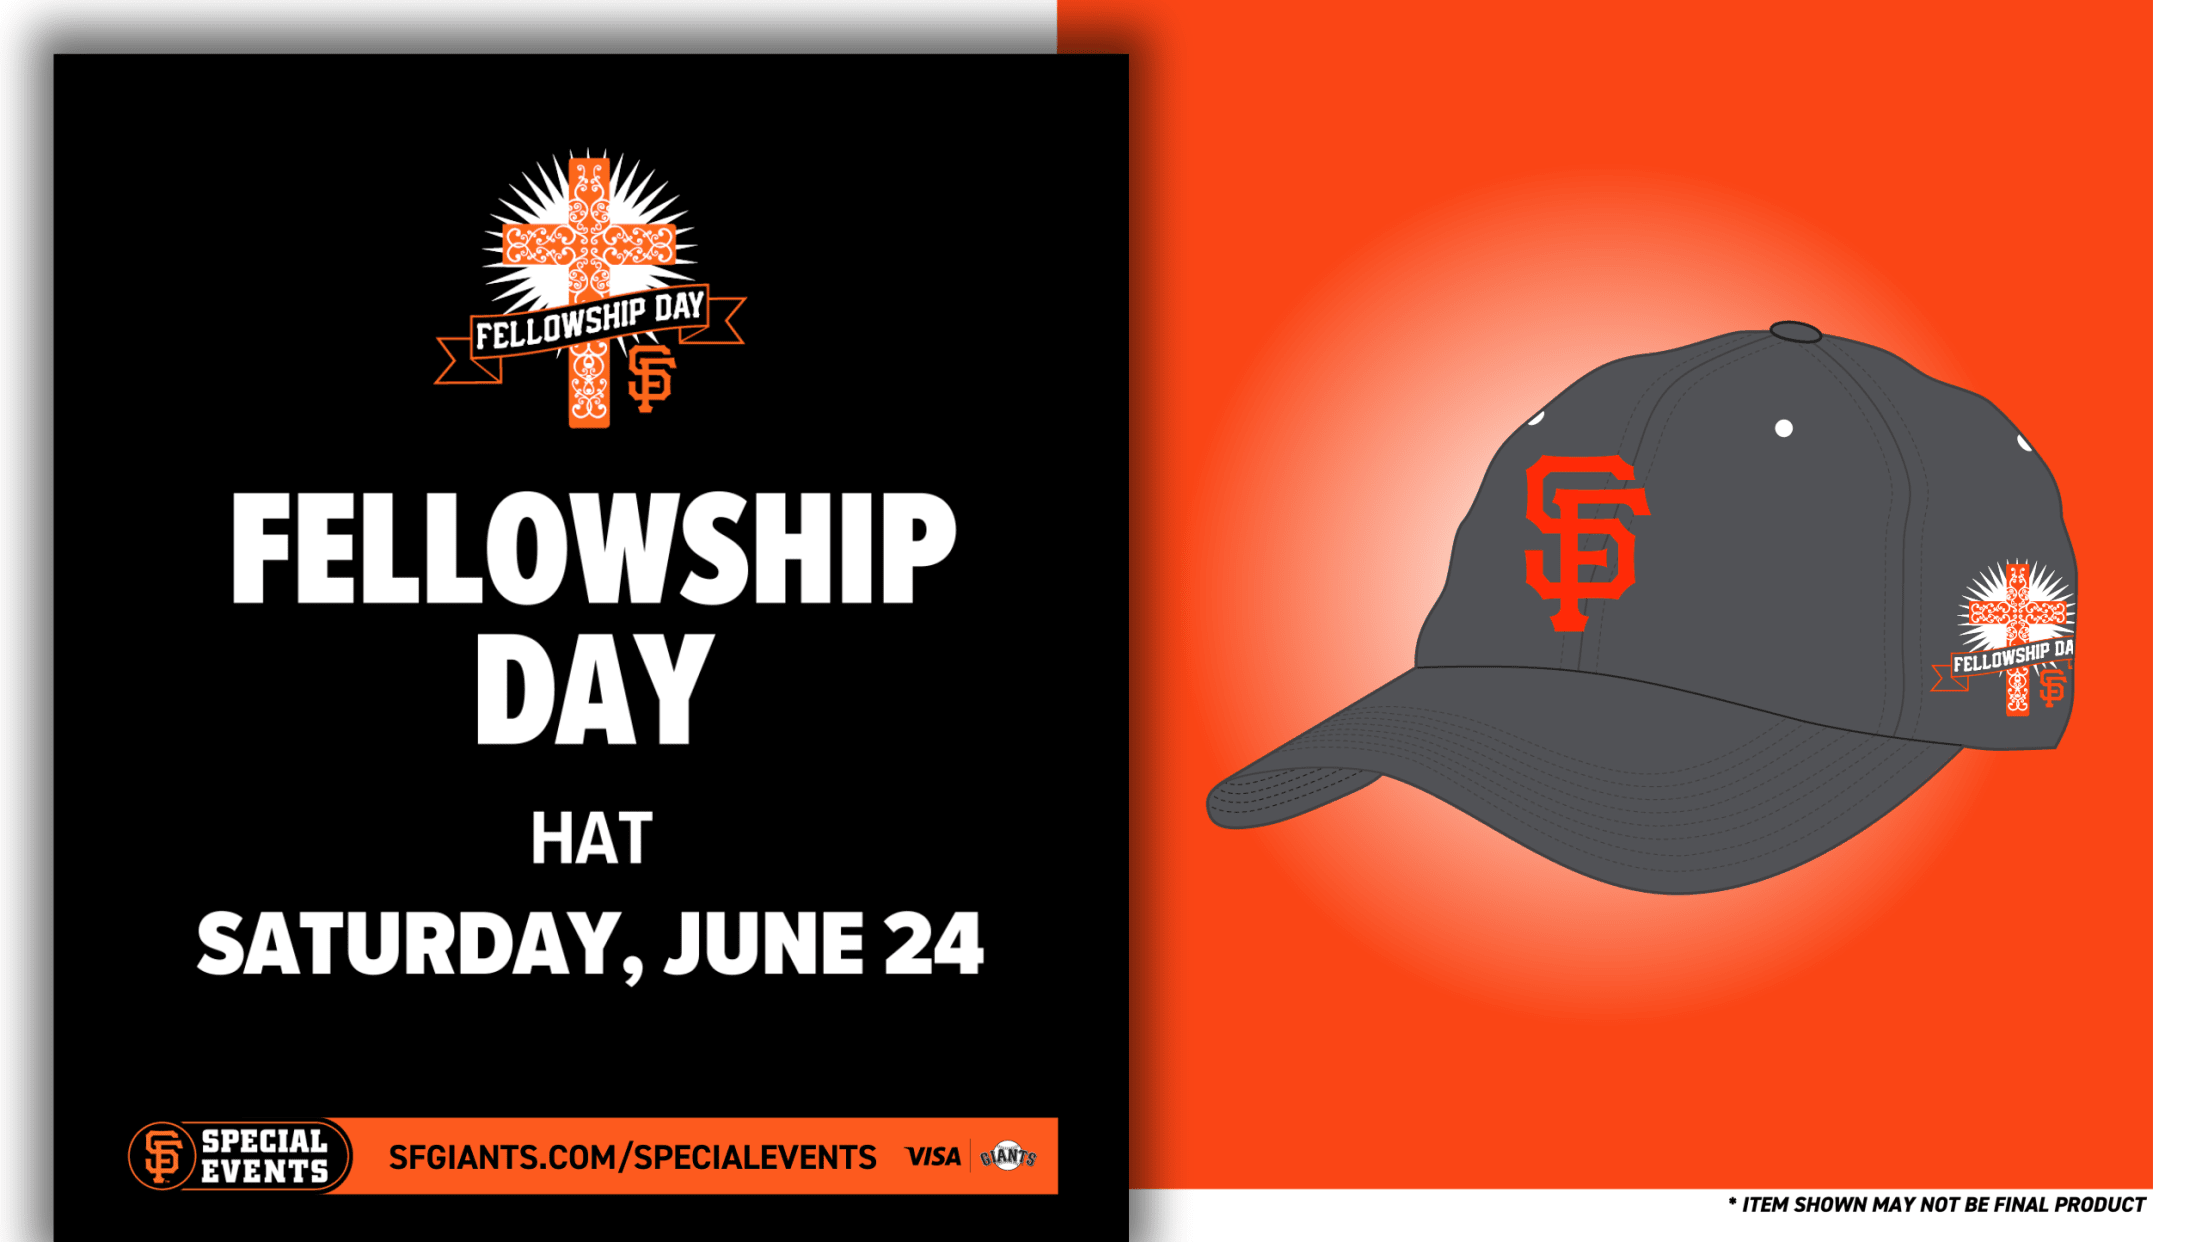 San Francisco Giants - Good Morning, Independence Day 󾔕 #SFGiants